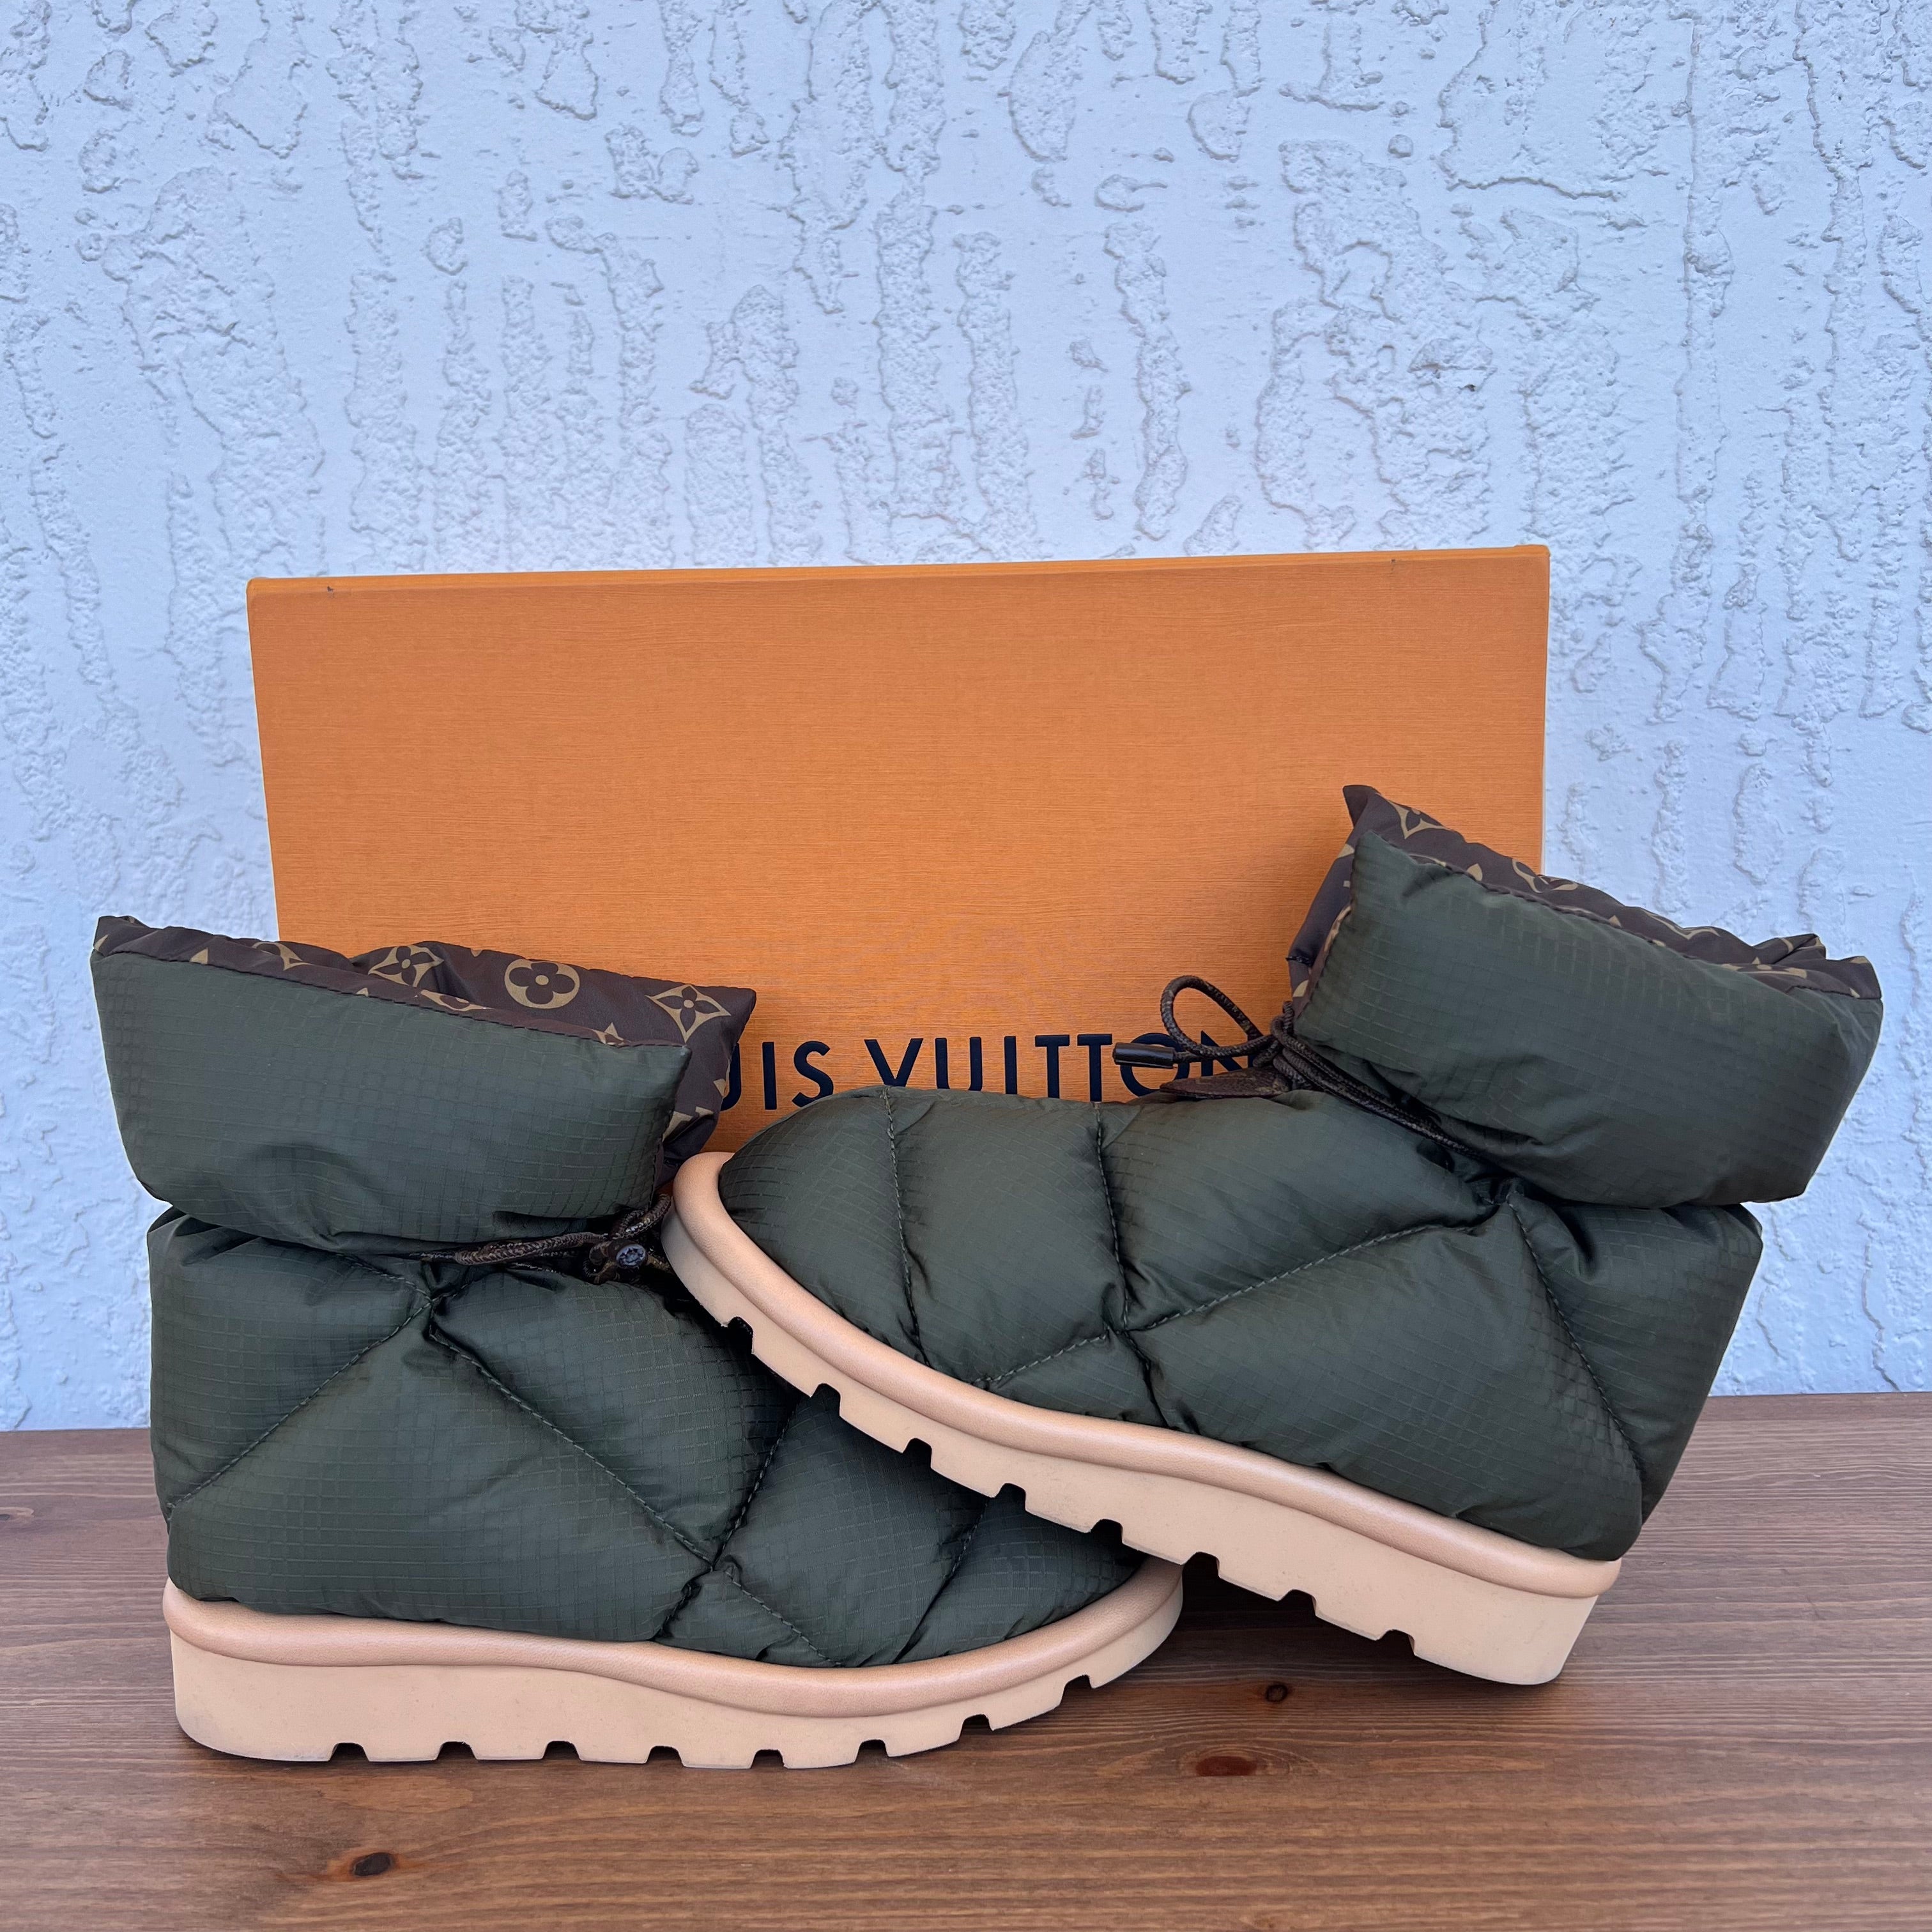 Louis Vuitton brown Pillow Comfort Ankle Boots